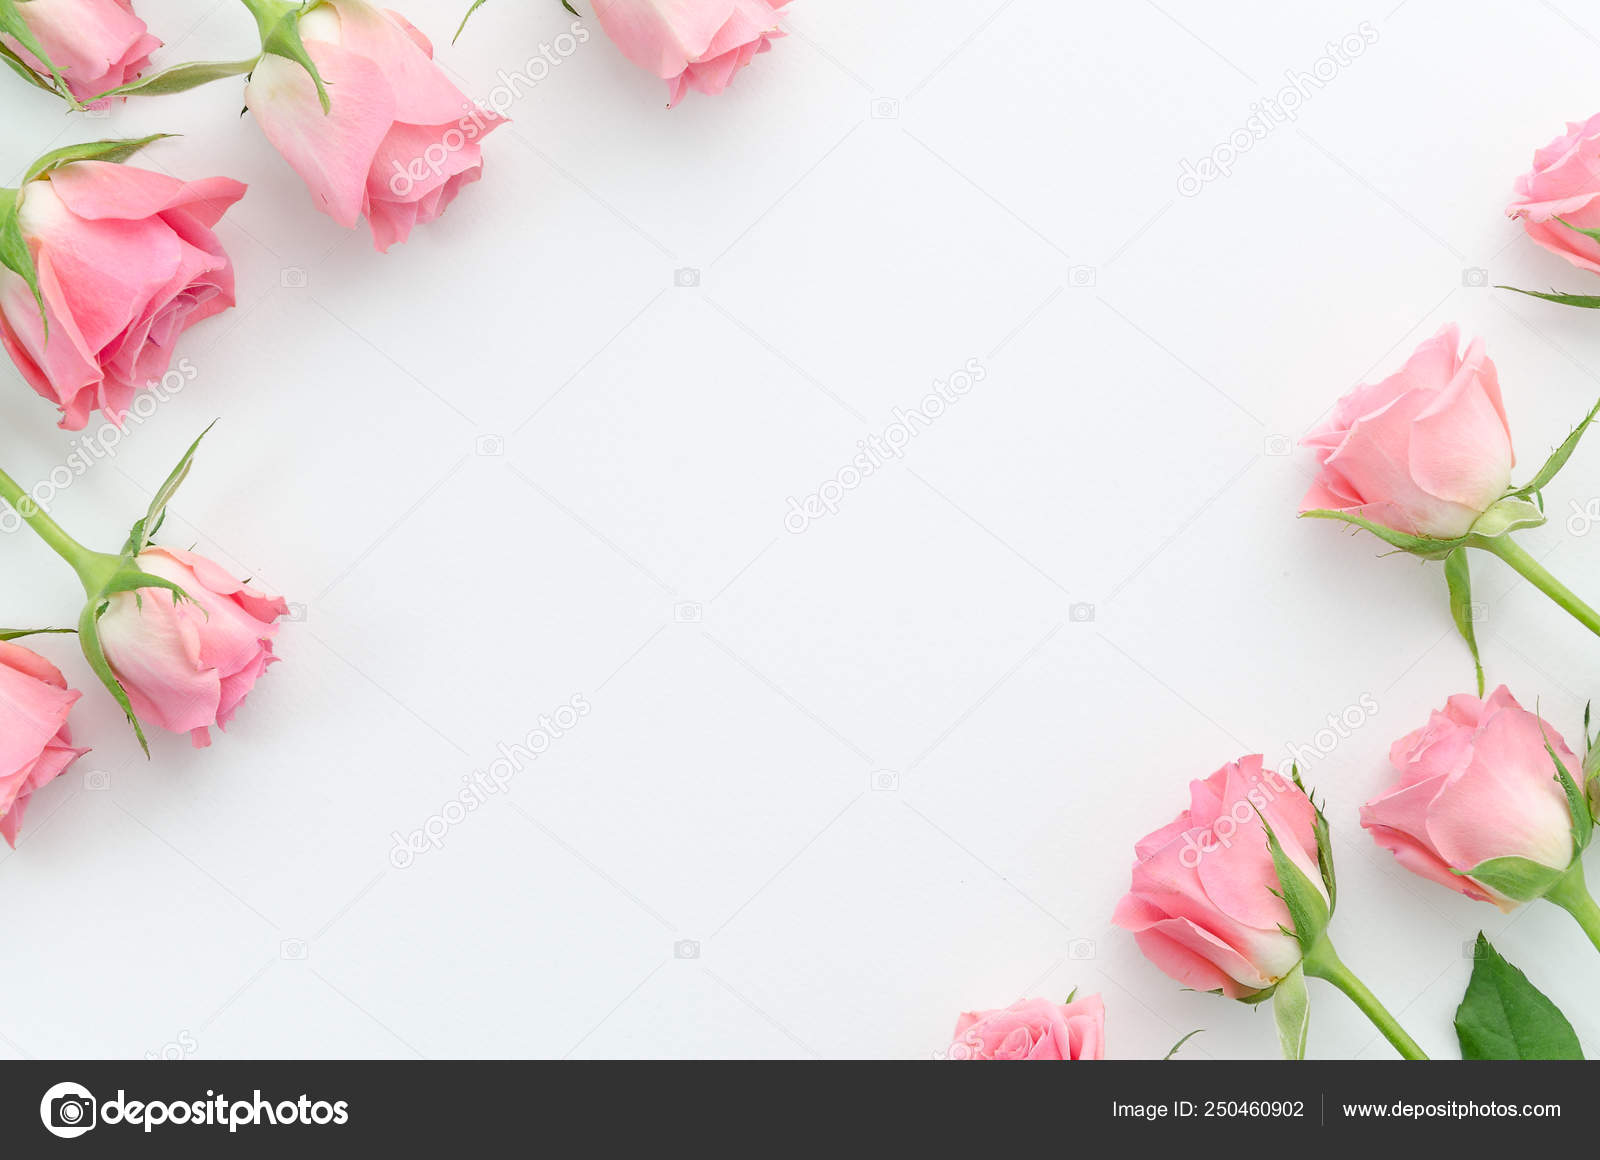 Pink Floral Paper With White Lace Border Stock Photo - Download Image Now -  Close-up, Cut Out, Decoration - iStock